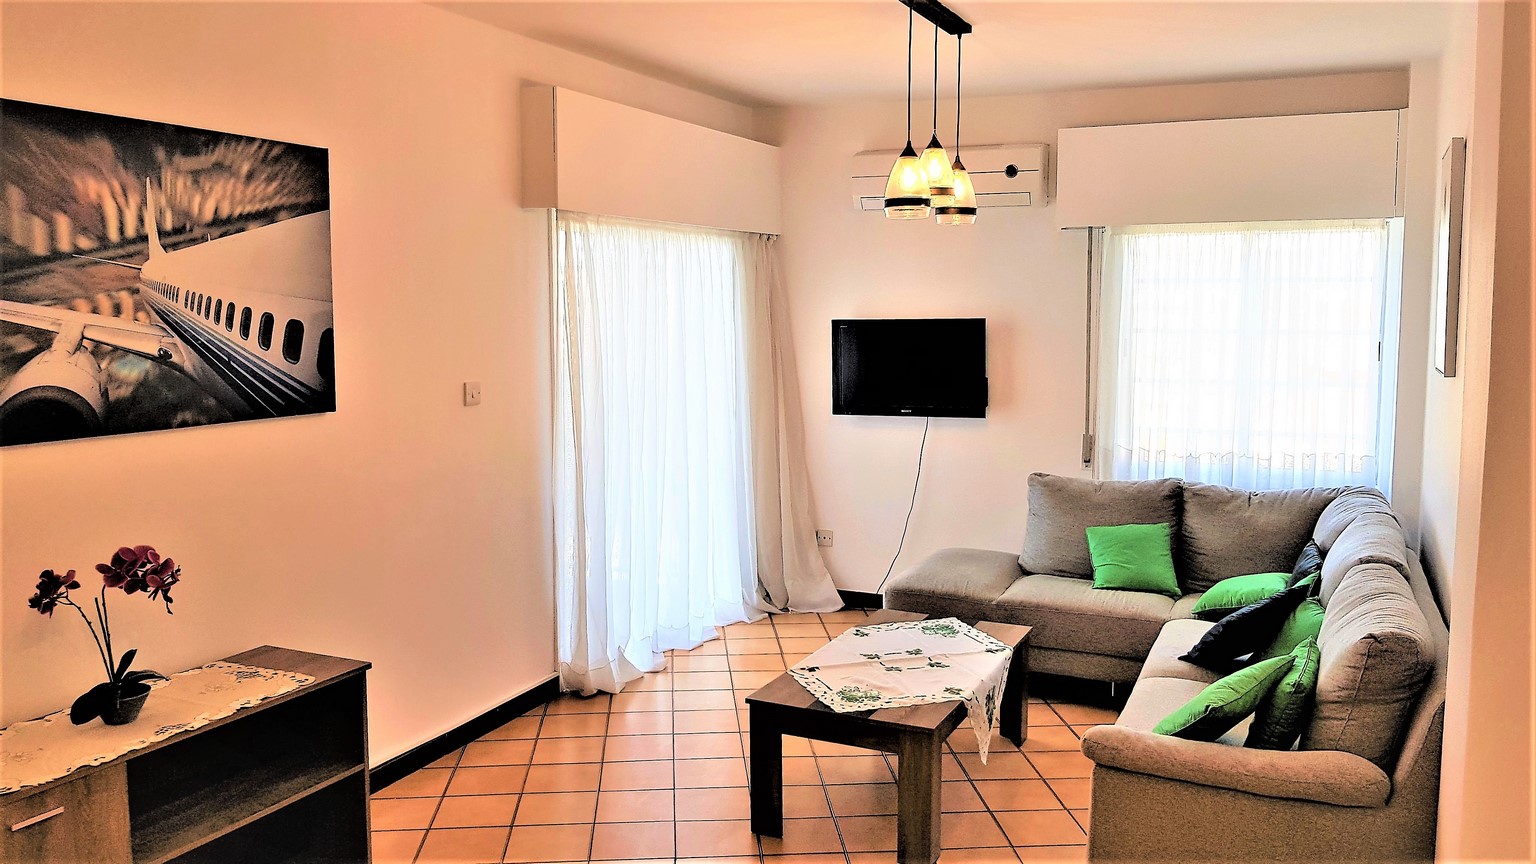 Apartment - 3 bedroom for rent, Molos area, Limassol